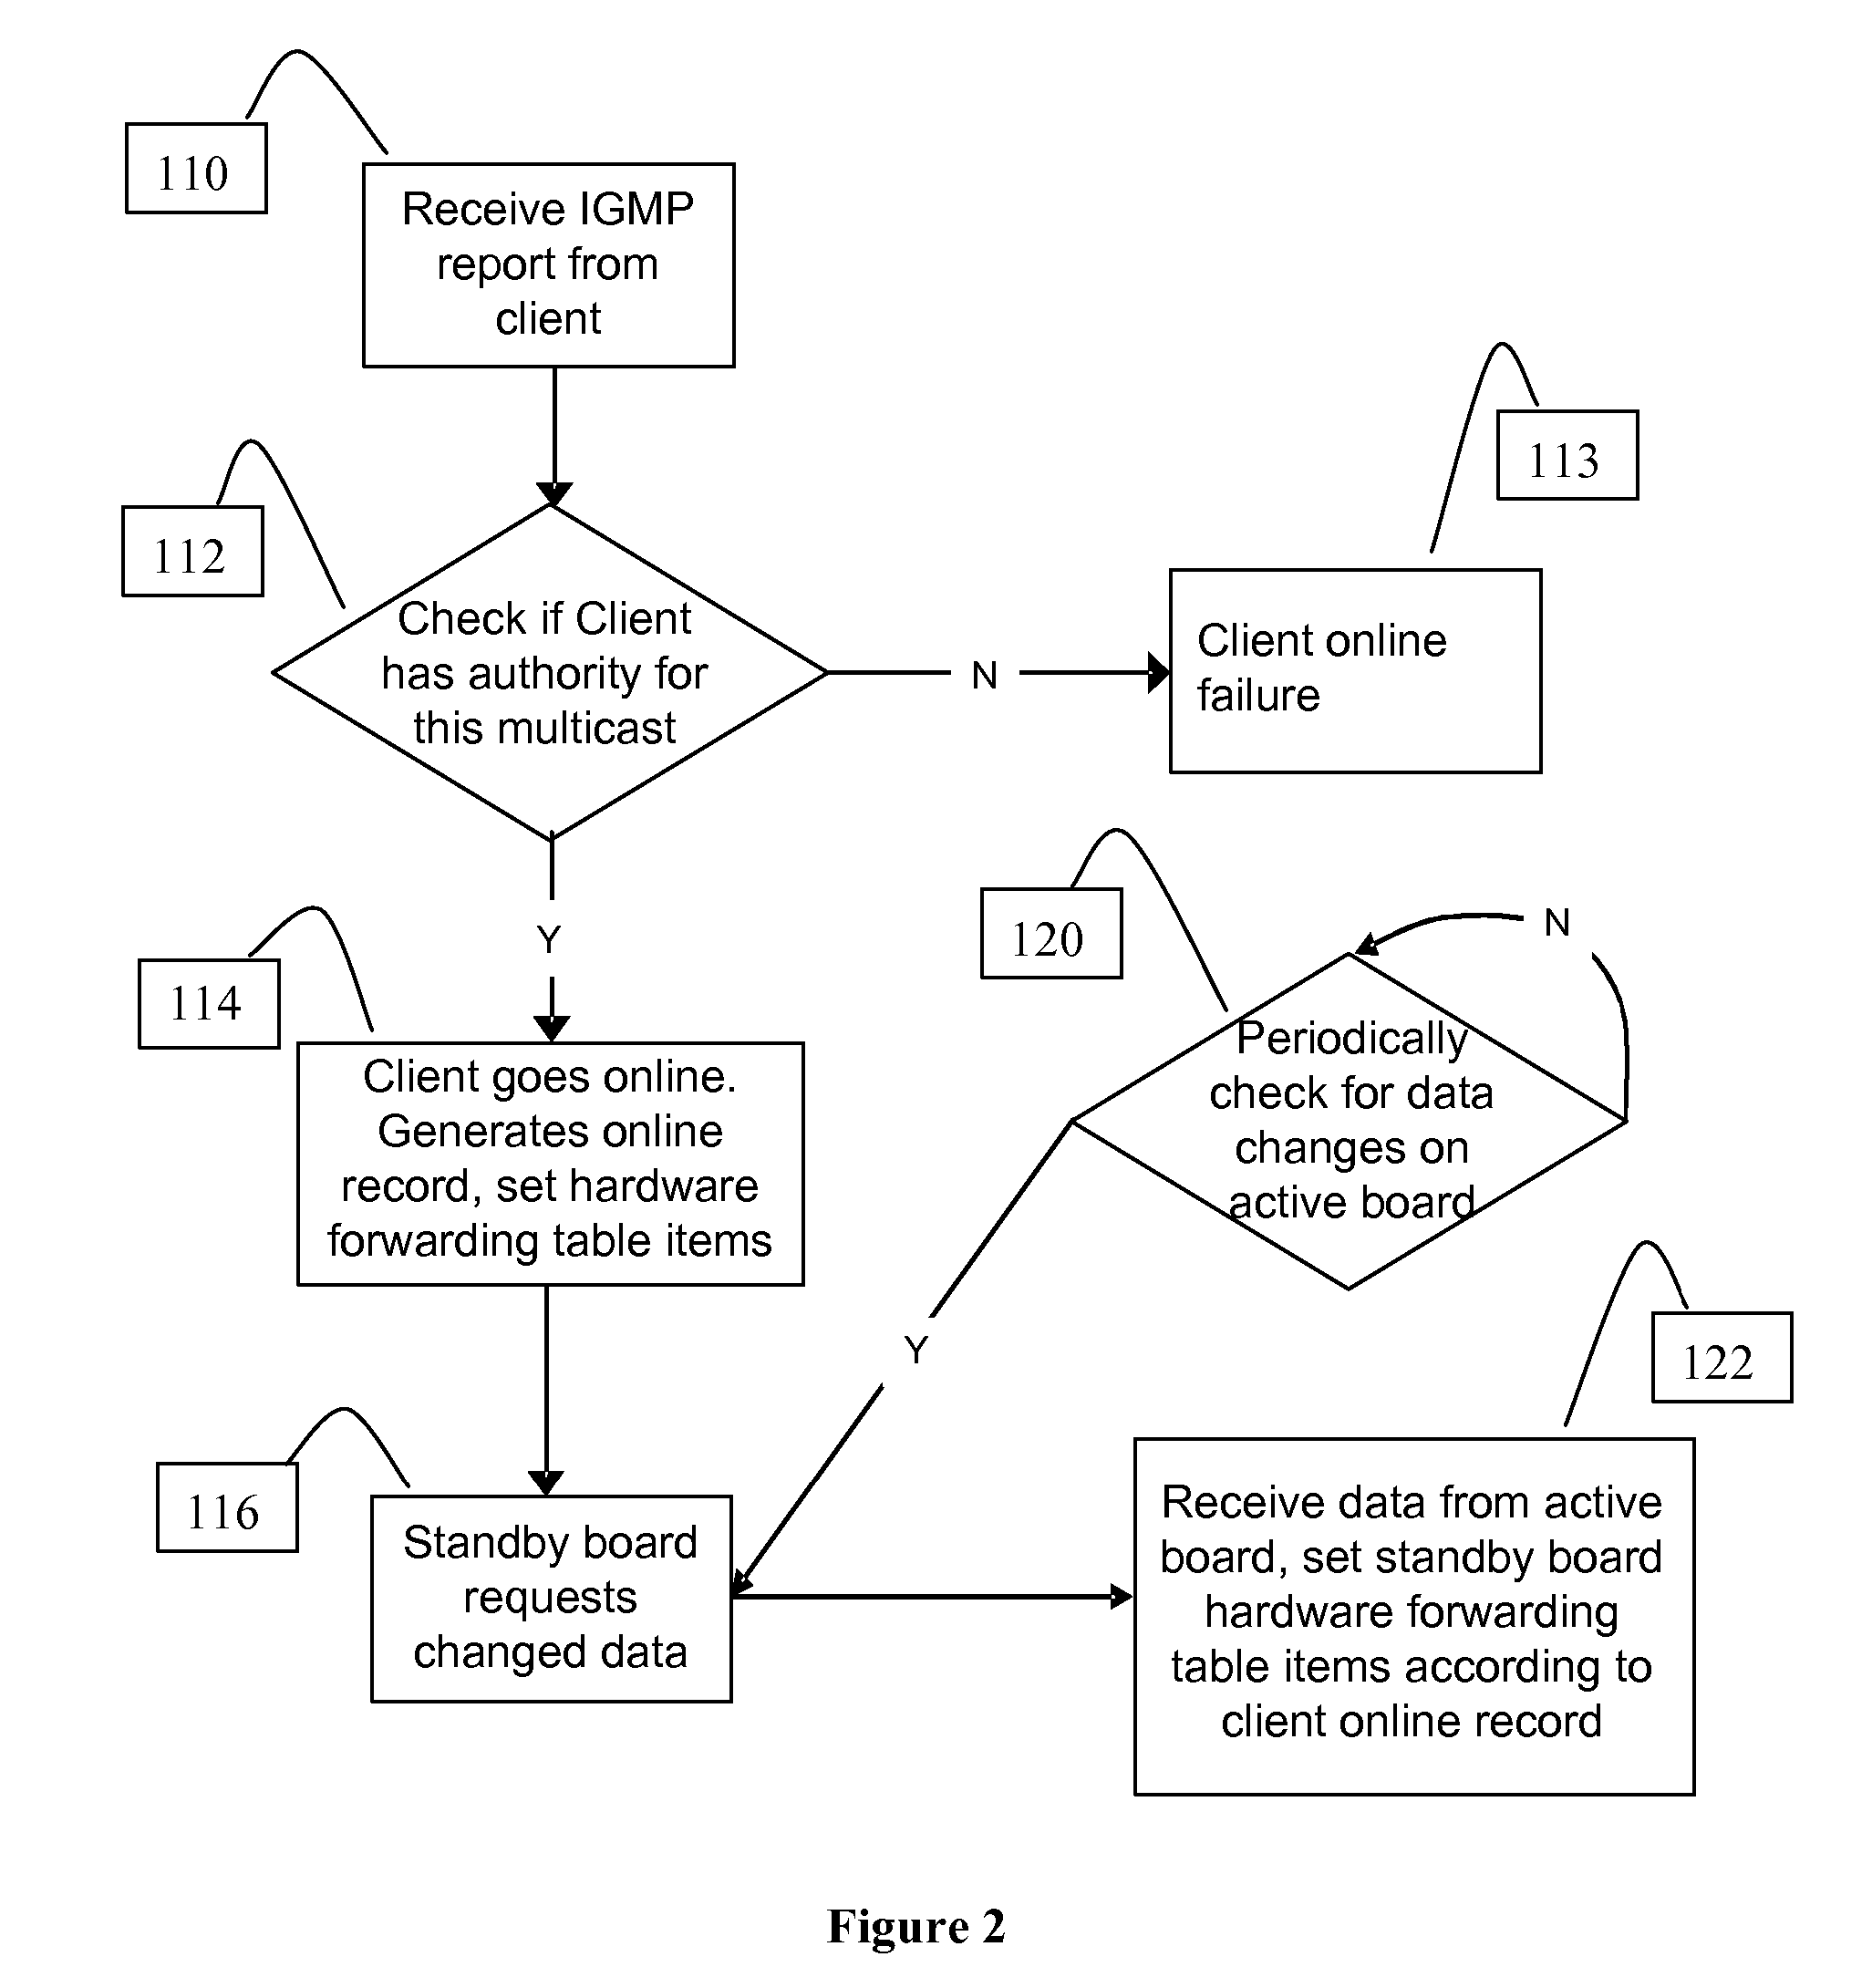 Method for implementing multicast based on switchover between active board and standby board in access device